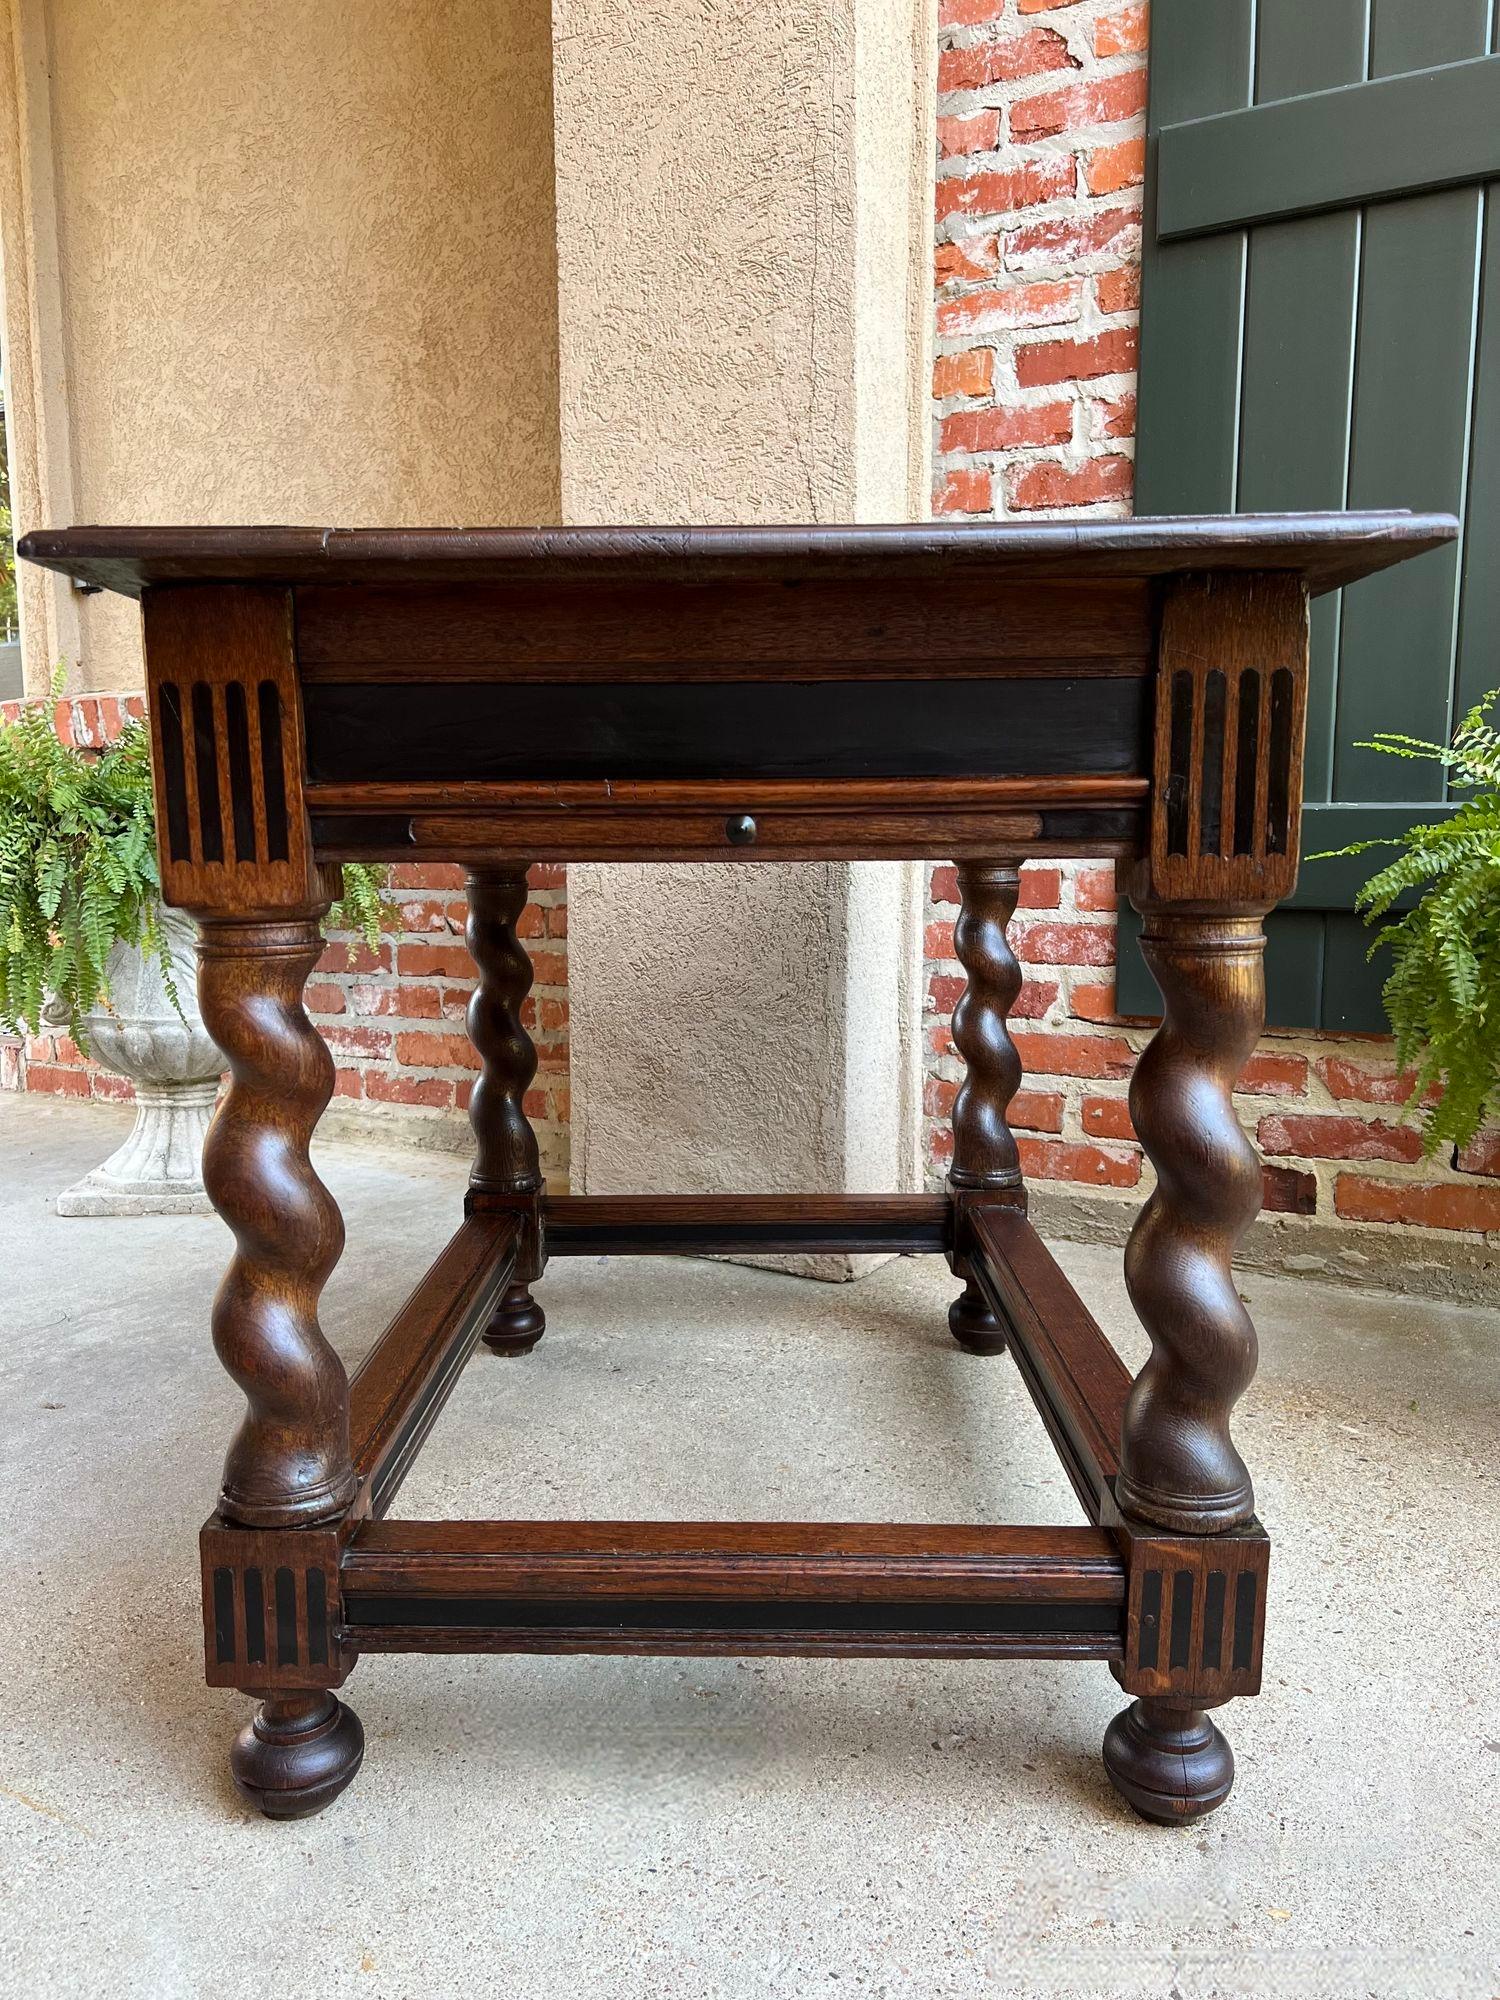 Late 18th Century Antique English Sofa Side Table Barley Twist Ebonized Library Desk Carved Oak For Sale